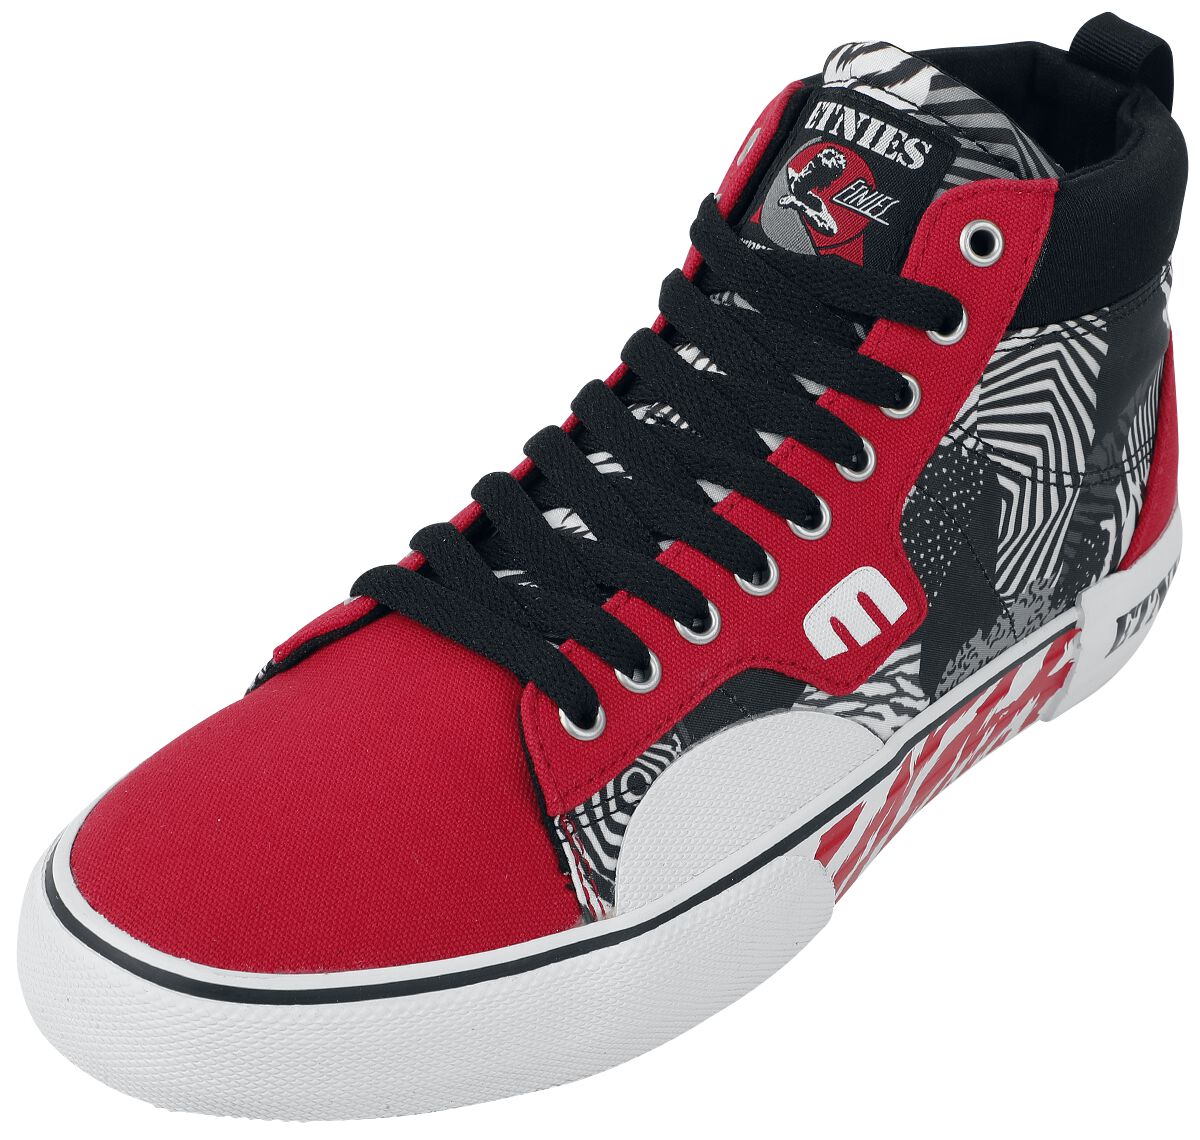 Etnies Kayson High Sneakers High black white red